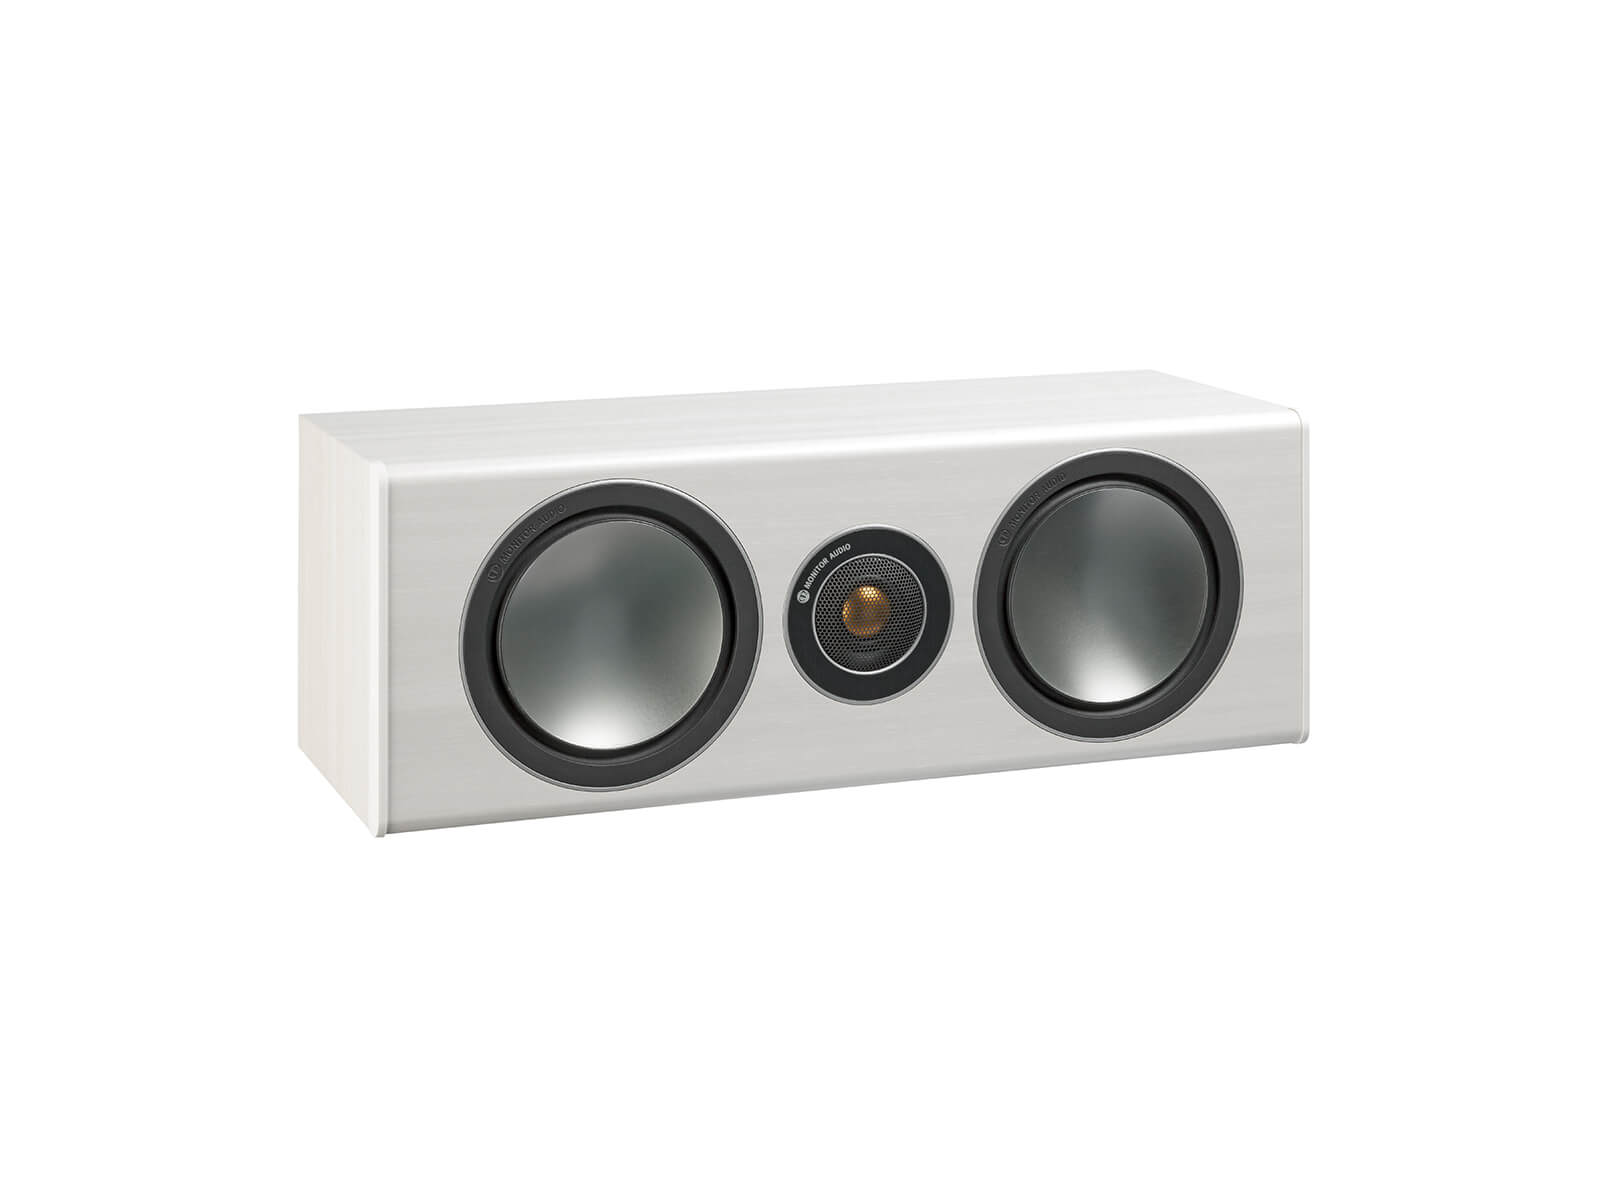 Bronze Centre, grille-less centre channel speakers, with a white ash vinyl finish.